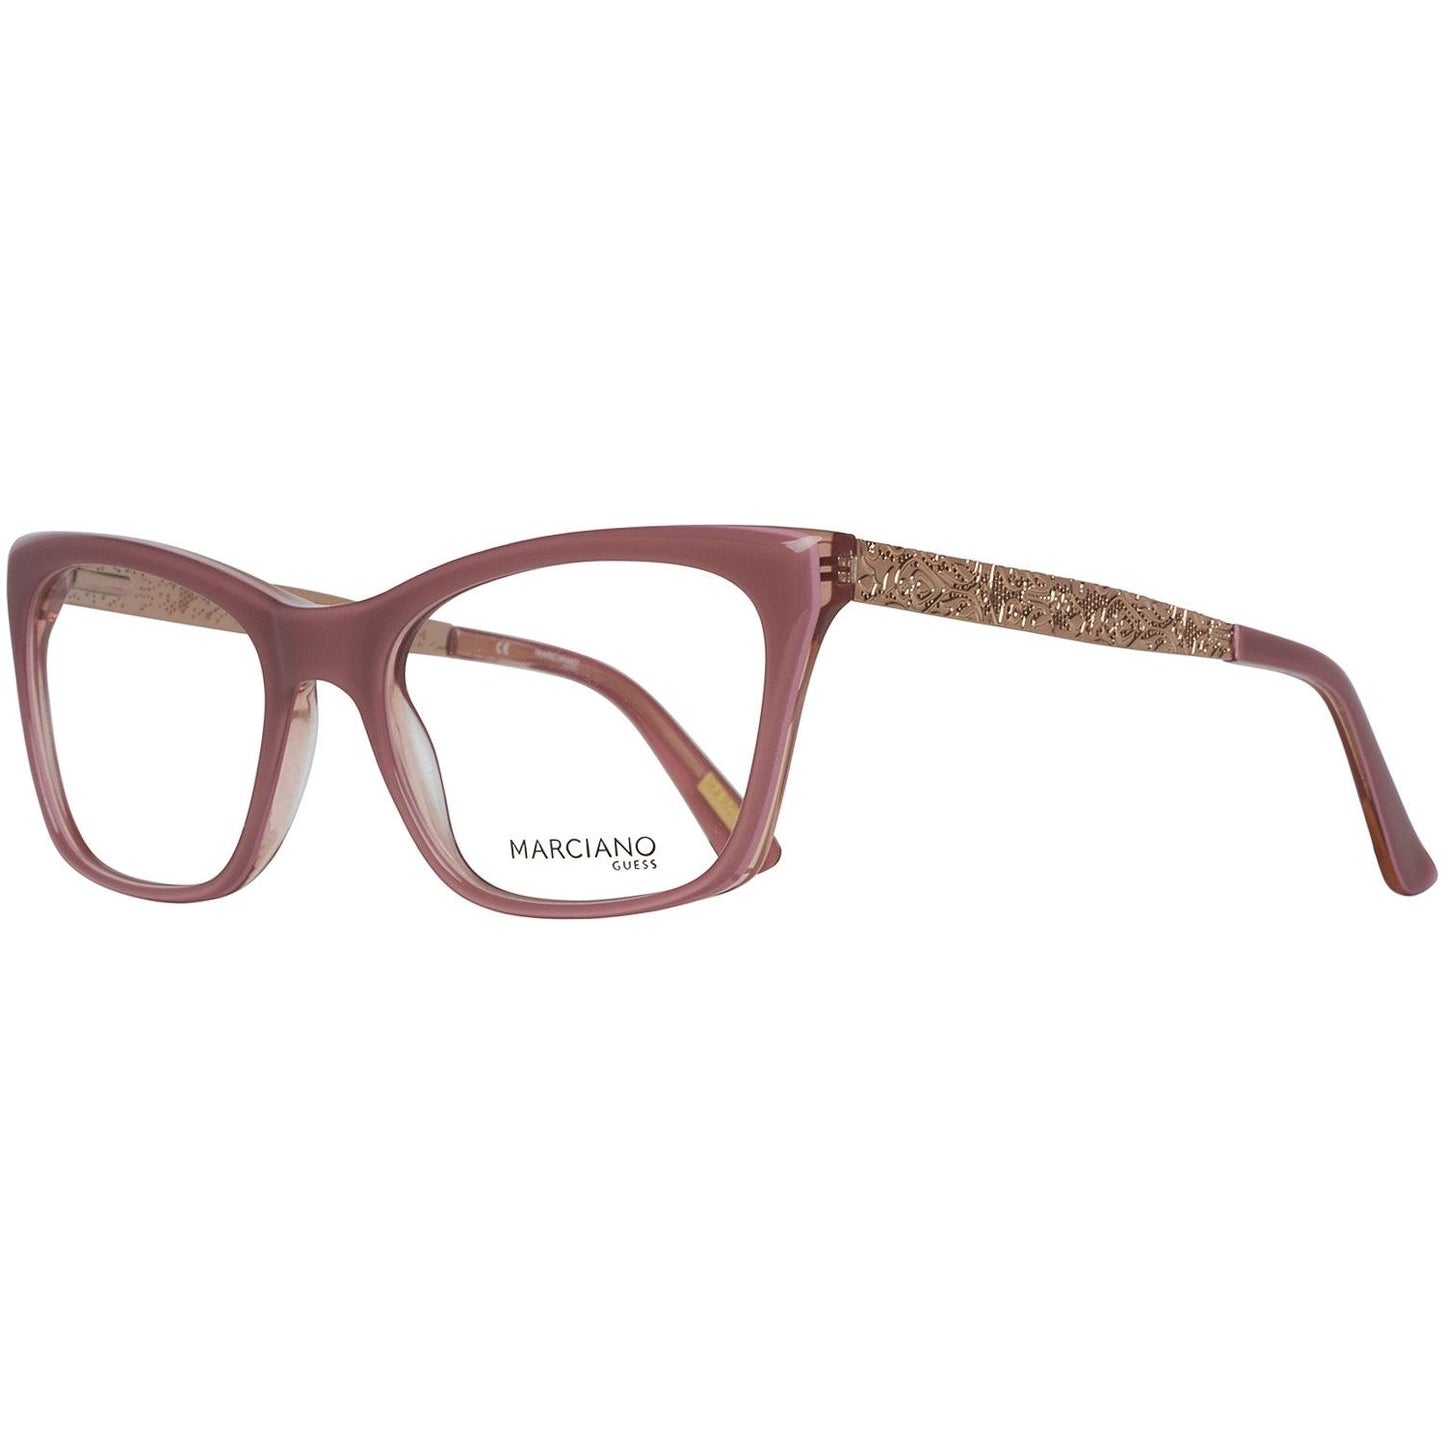 MARCIANO By GUESS EYEWEARMARCIANO BY GUESS MOD. GM0267 53072McRichard Designer Brands£106.00